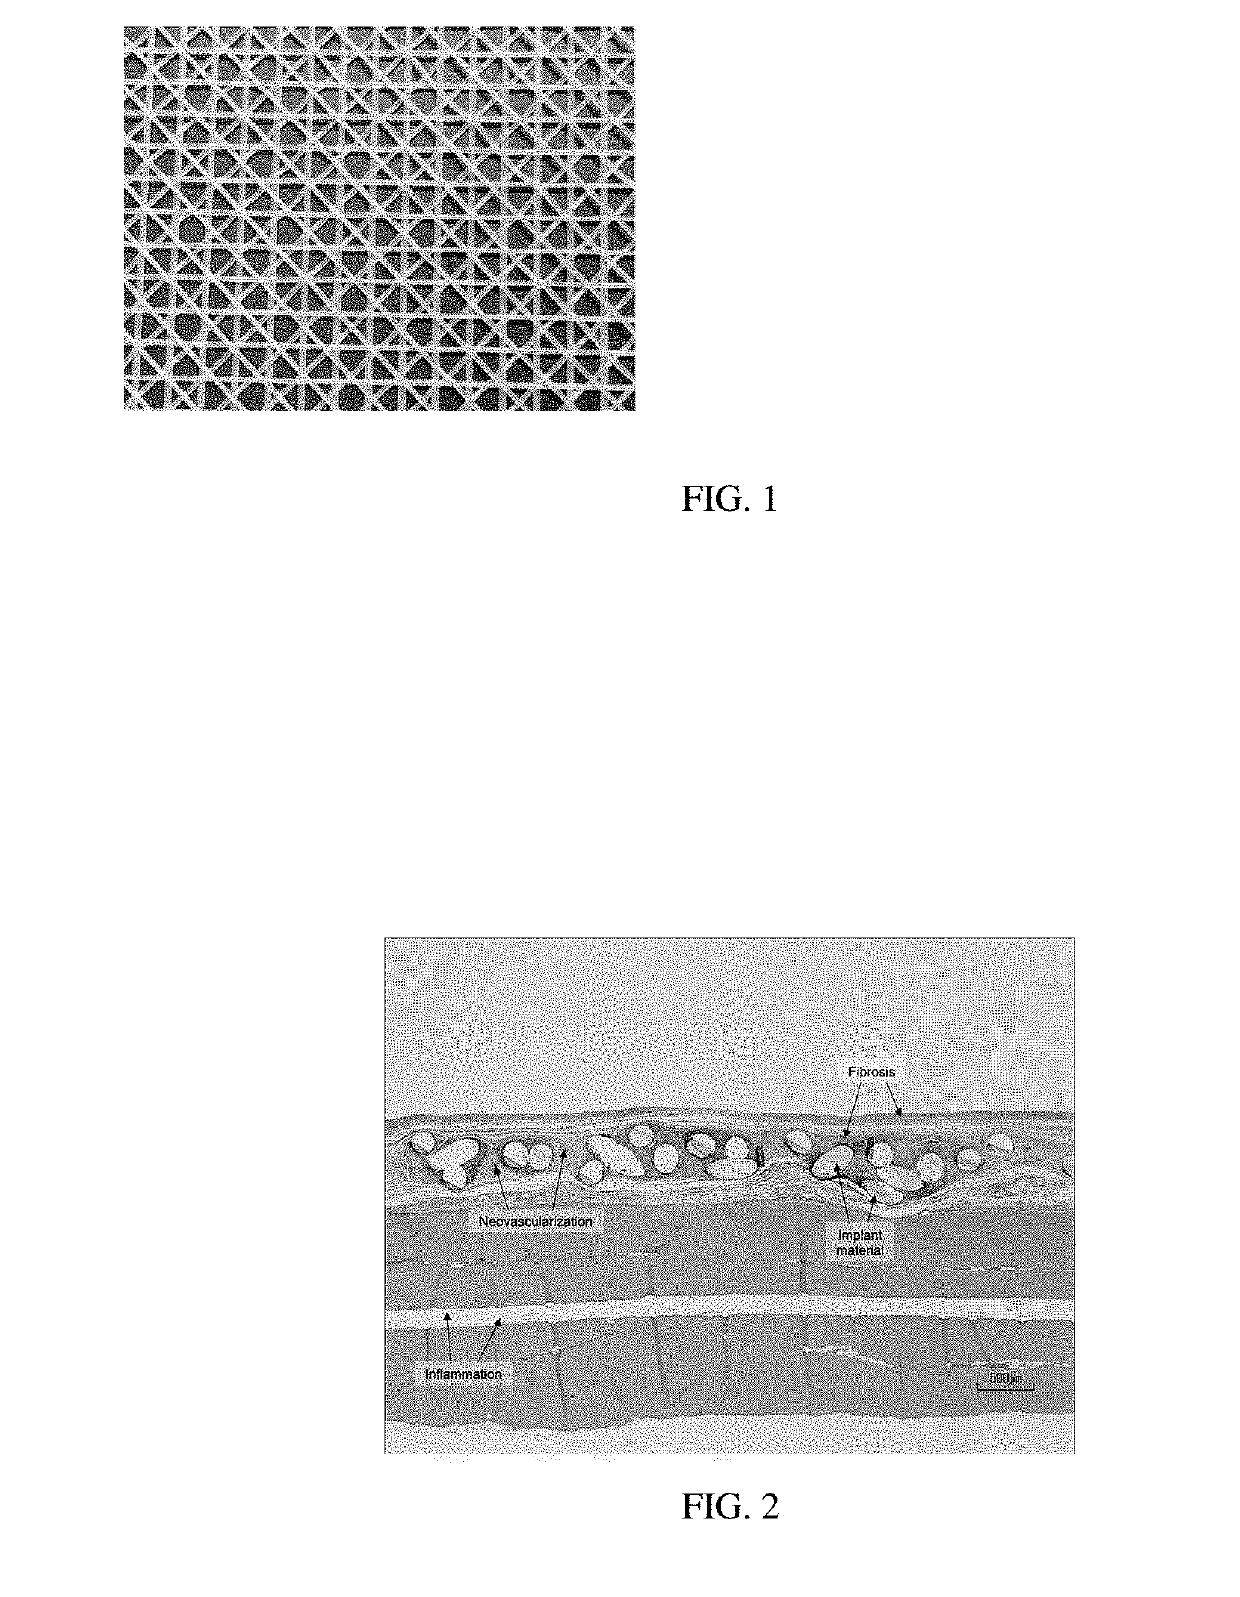 Yarns and fibers of poly(butylene succinate) and copolymers thereof, and methods of use therof